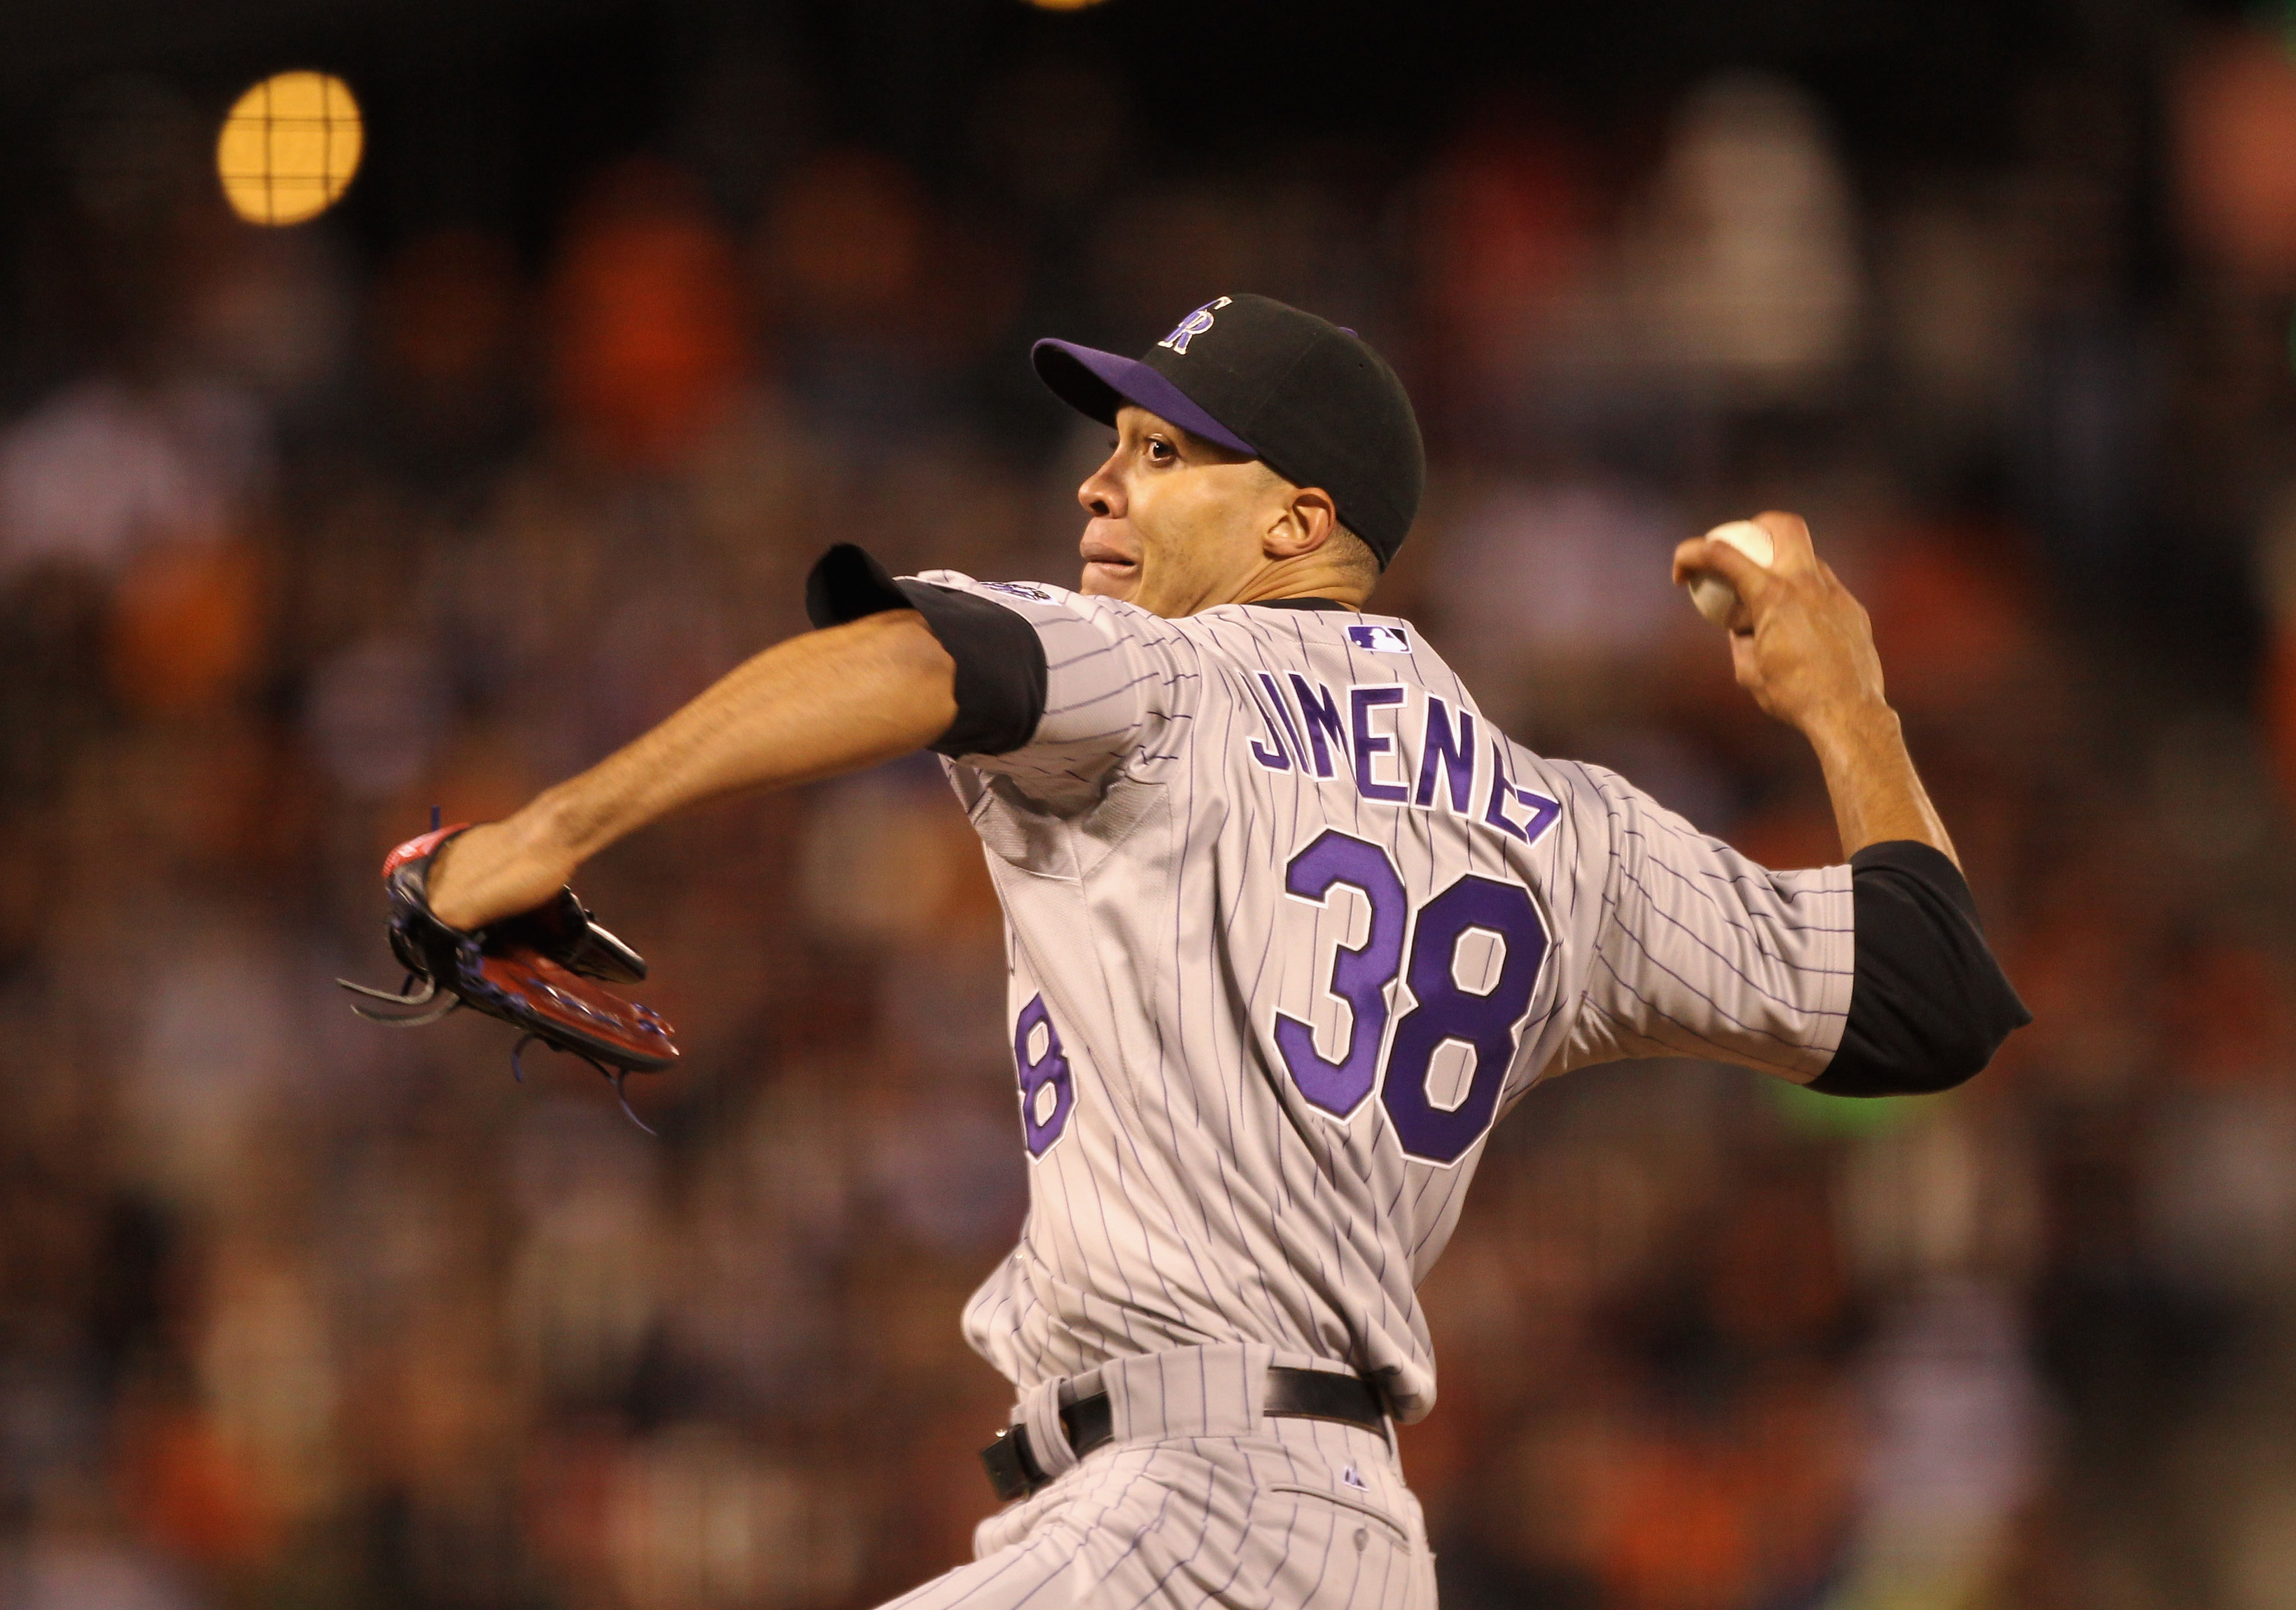 Things are looking a little bit better for Ubaldo Jimenez and the Rockies.